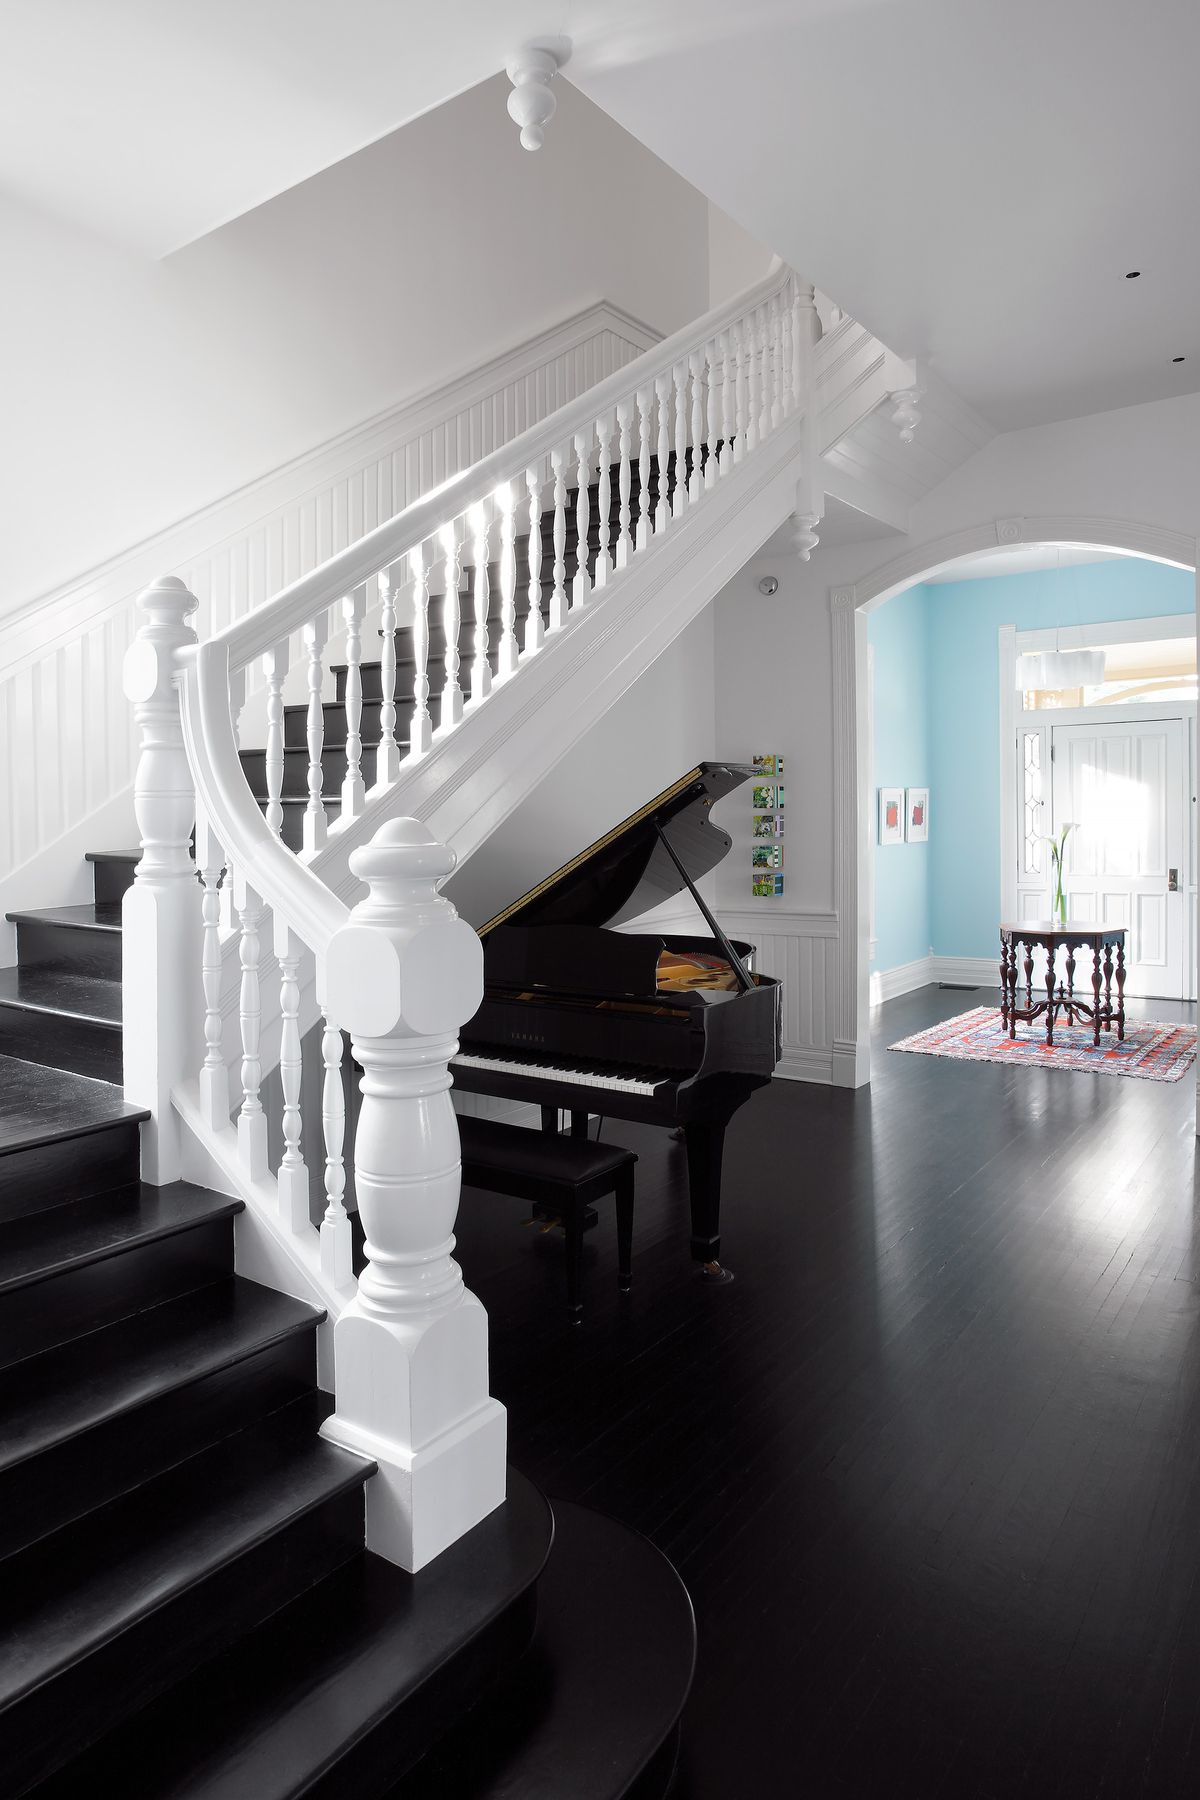 A grand Staircase with a piano under it.